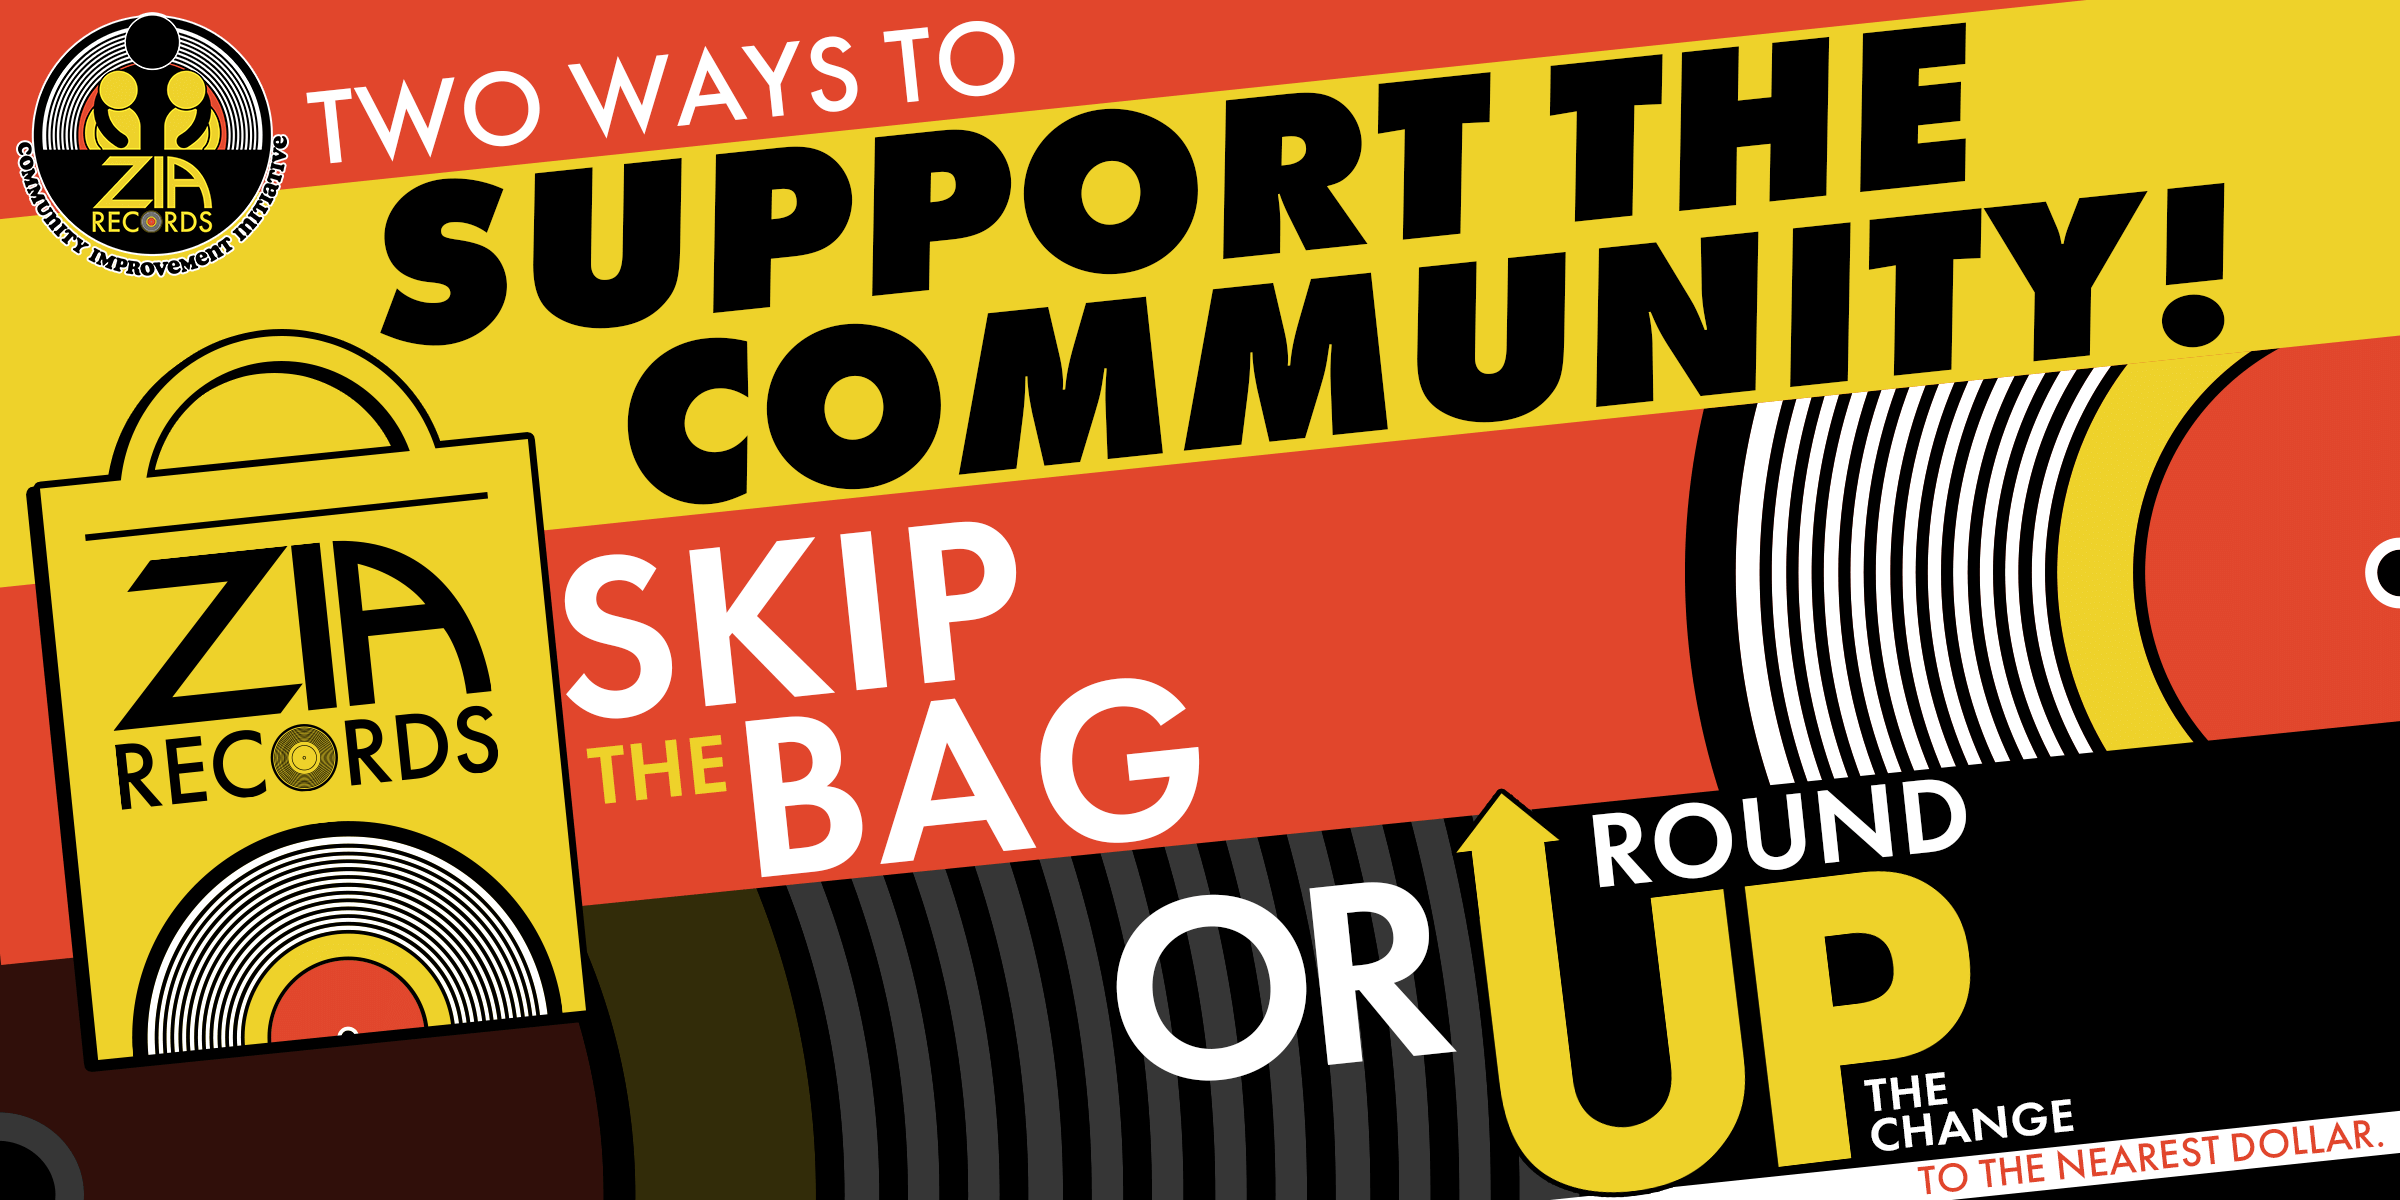 Support the community